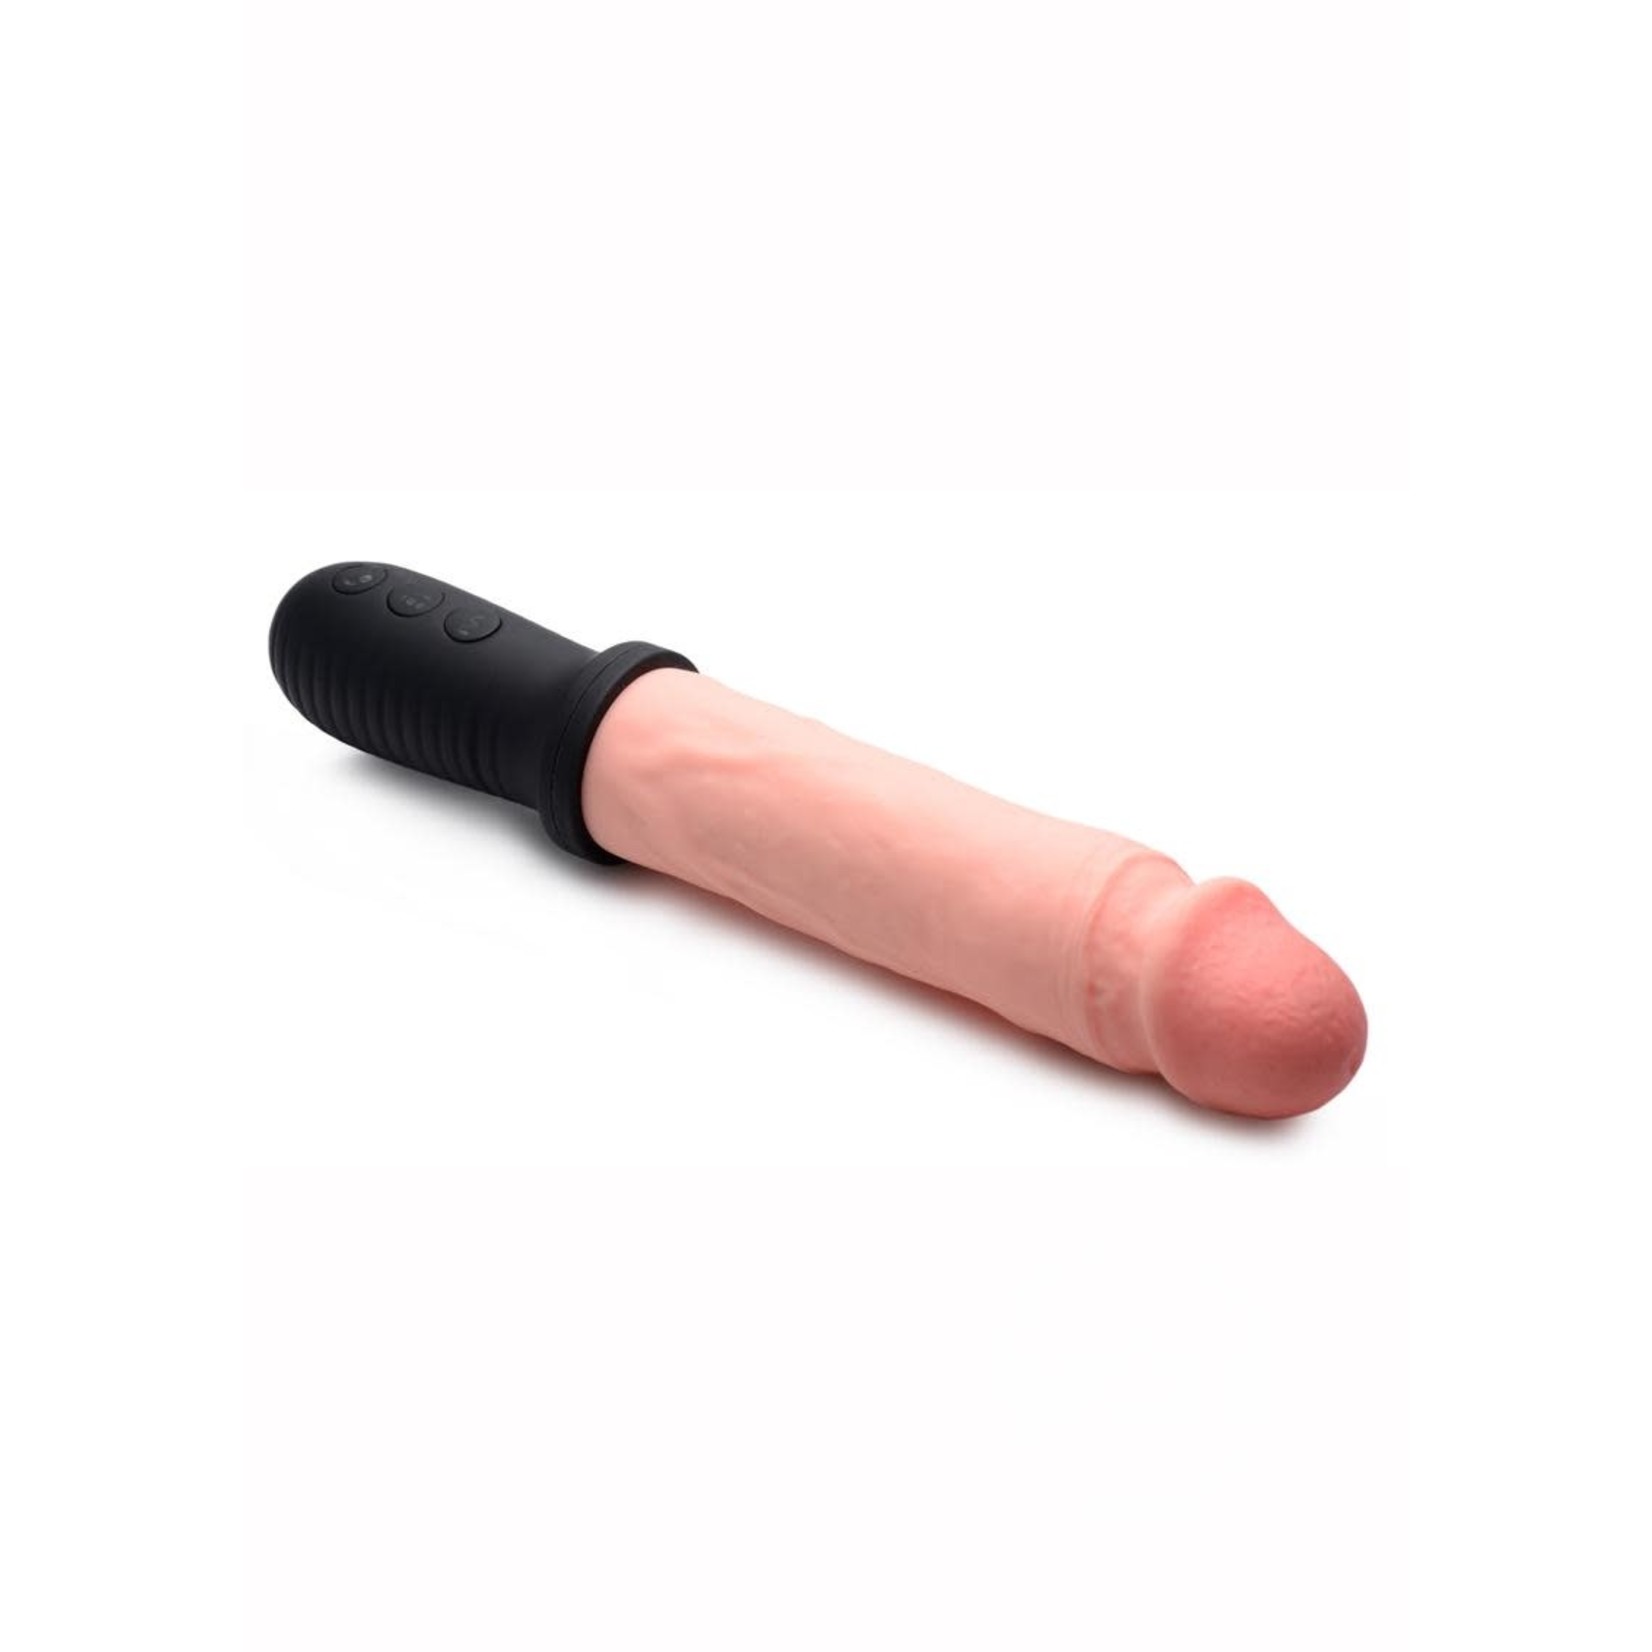 Master Series 8x Auto Pounder Rechargeable Silicone Vibrating & Thrusting Dildo with Handle 10in - Vanilla